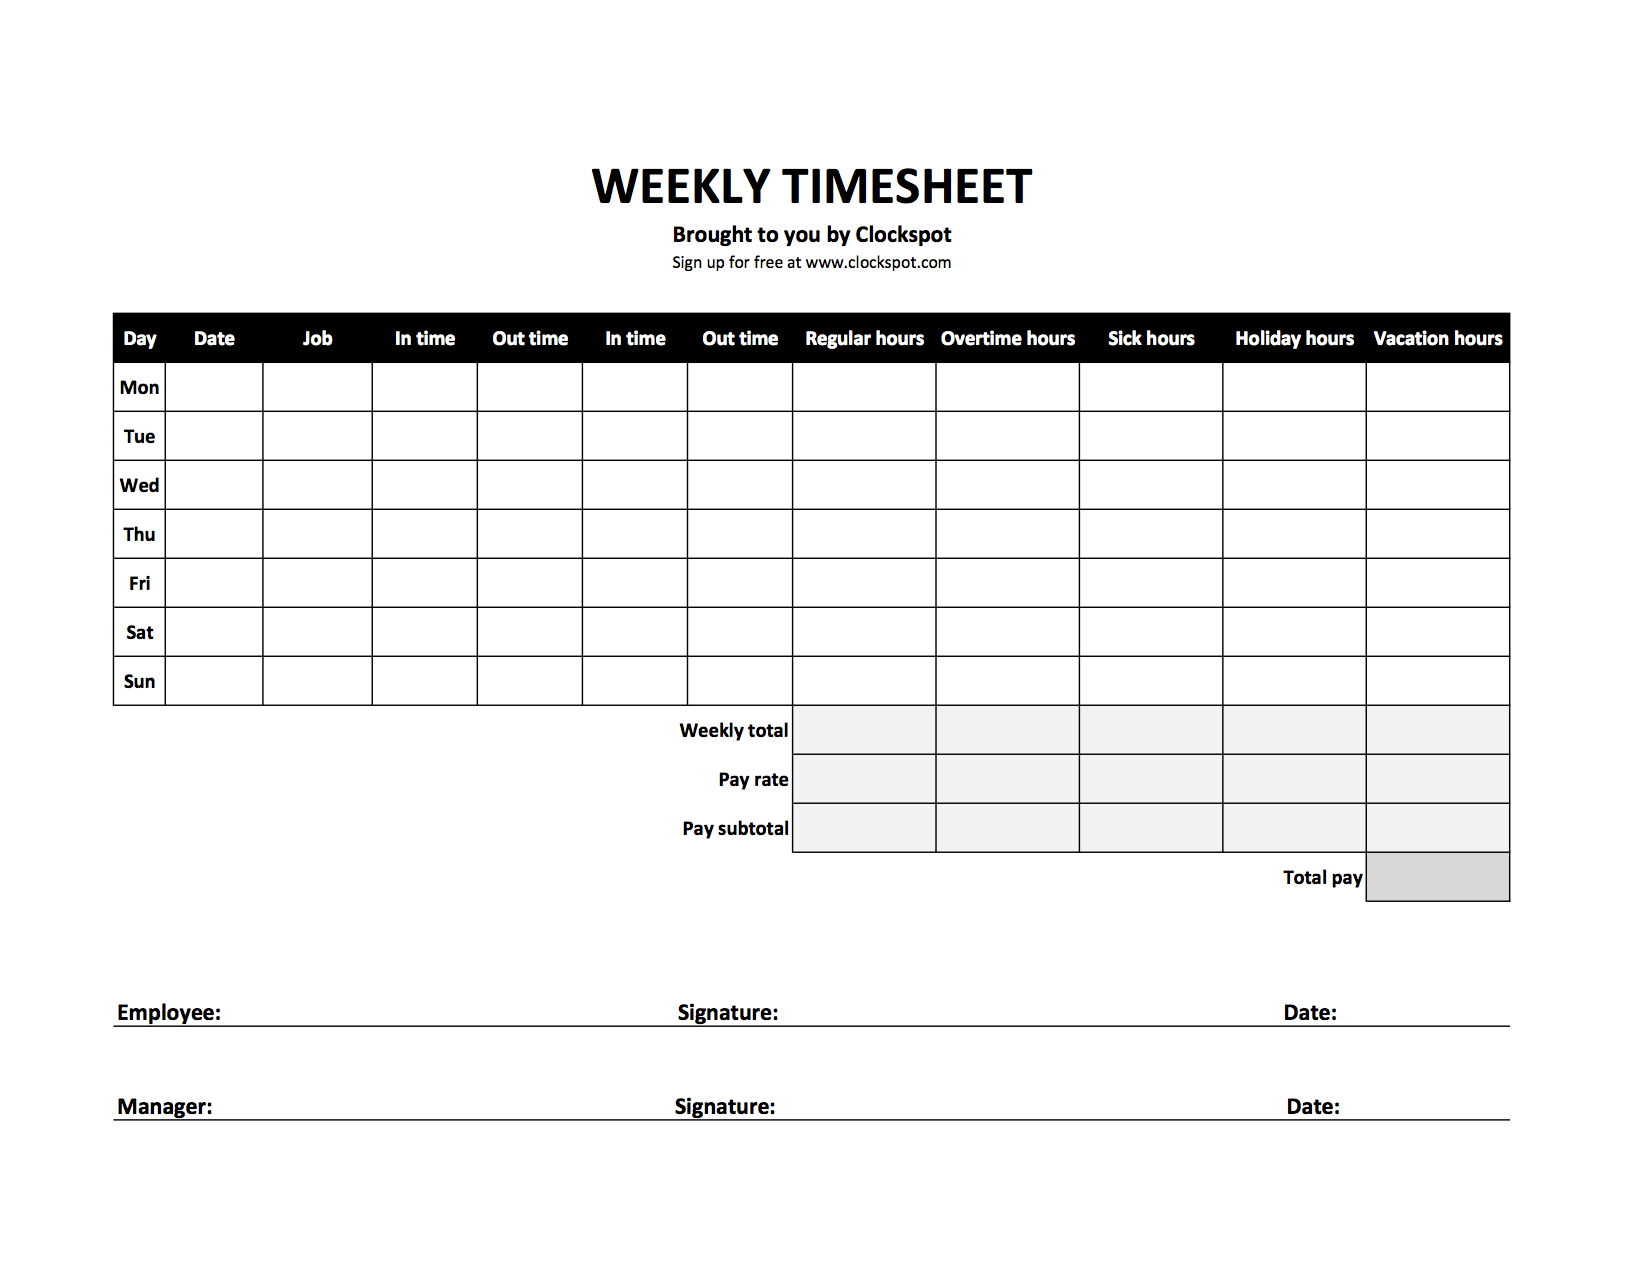 Monthly Timesheet Excel Spreadsheet For Free Time Tracking Spreadsheets  Excel Timesheet Templates